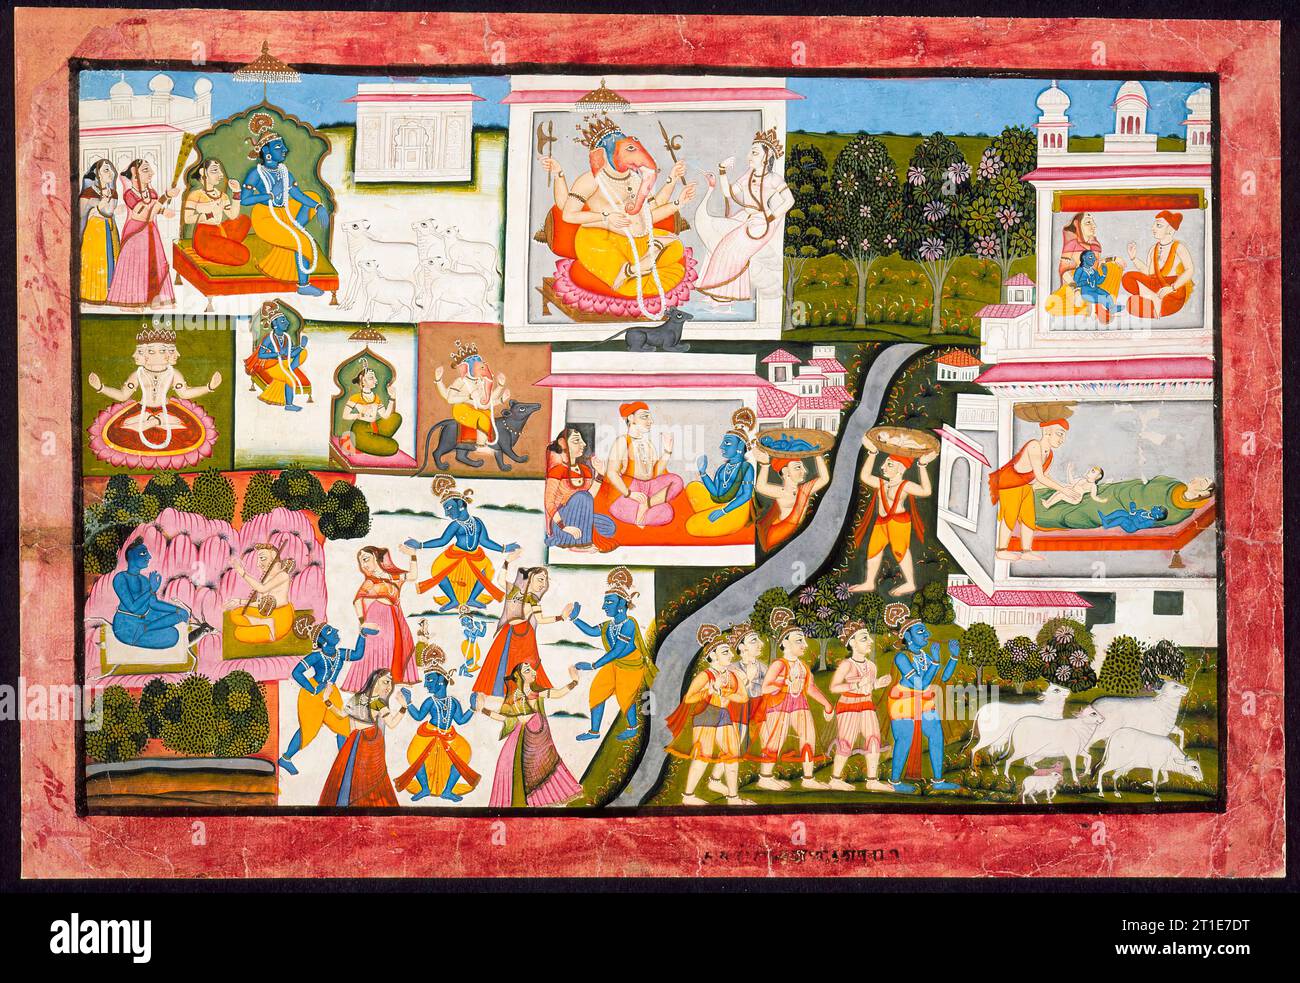 Scenes from the Life of Krishna, Folio from a Bhagavata Purana (Ancient Stories of the Lord), c1775. Stock Photo